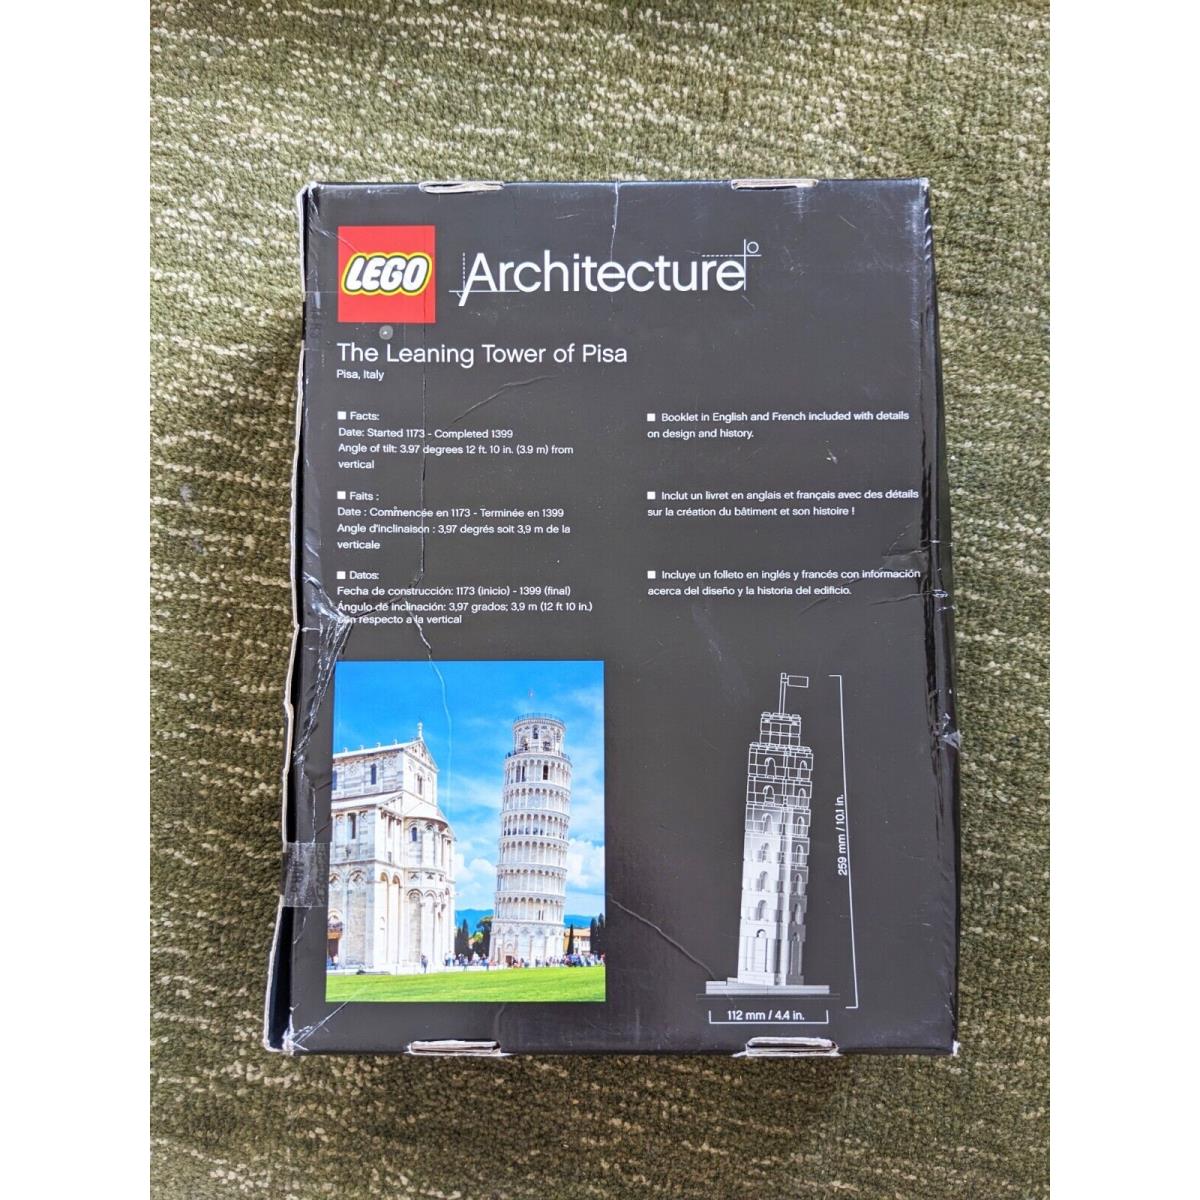 Lego Architecture: The Leaning Tower of Pisa 21015 - Box Some Wear